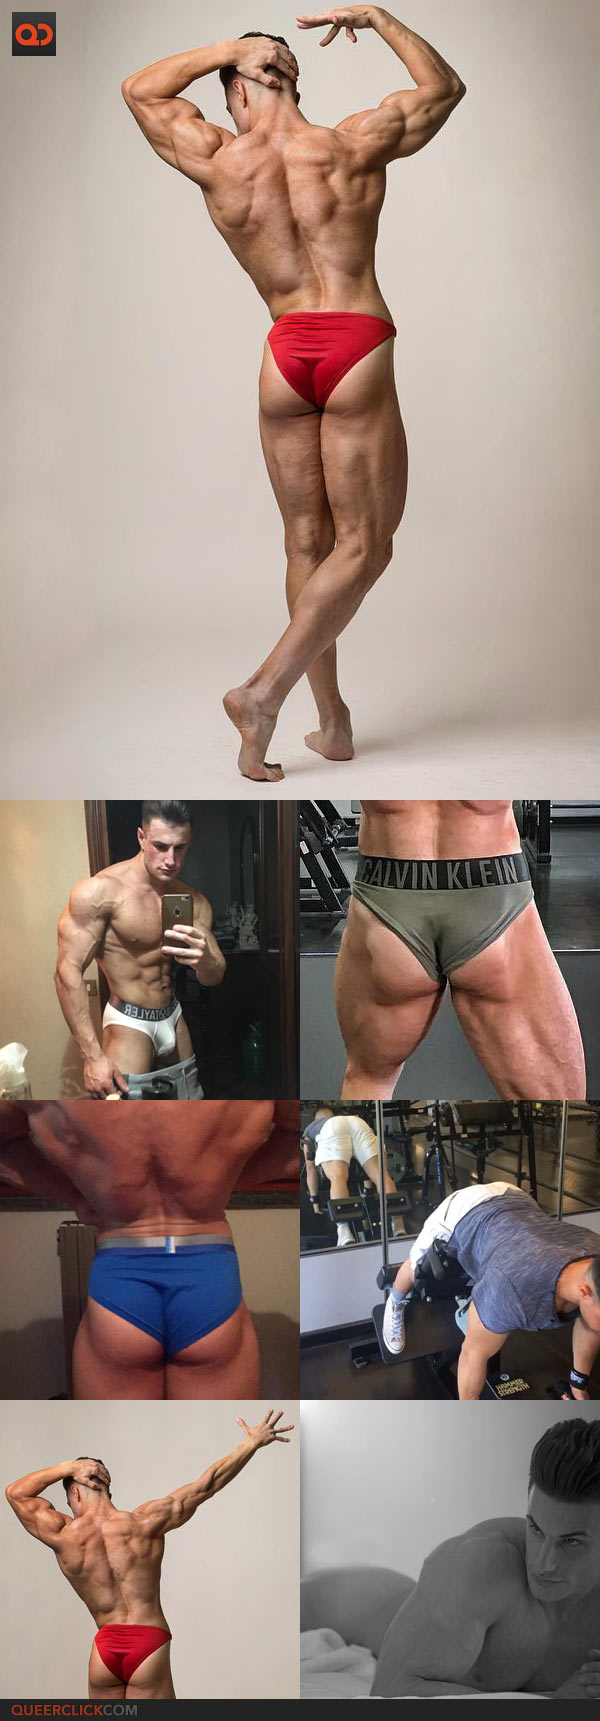 Ten Best Muscle Butts From Instagram You Need To Follow Right Now! - Part 2